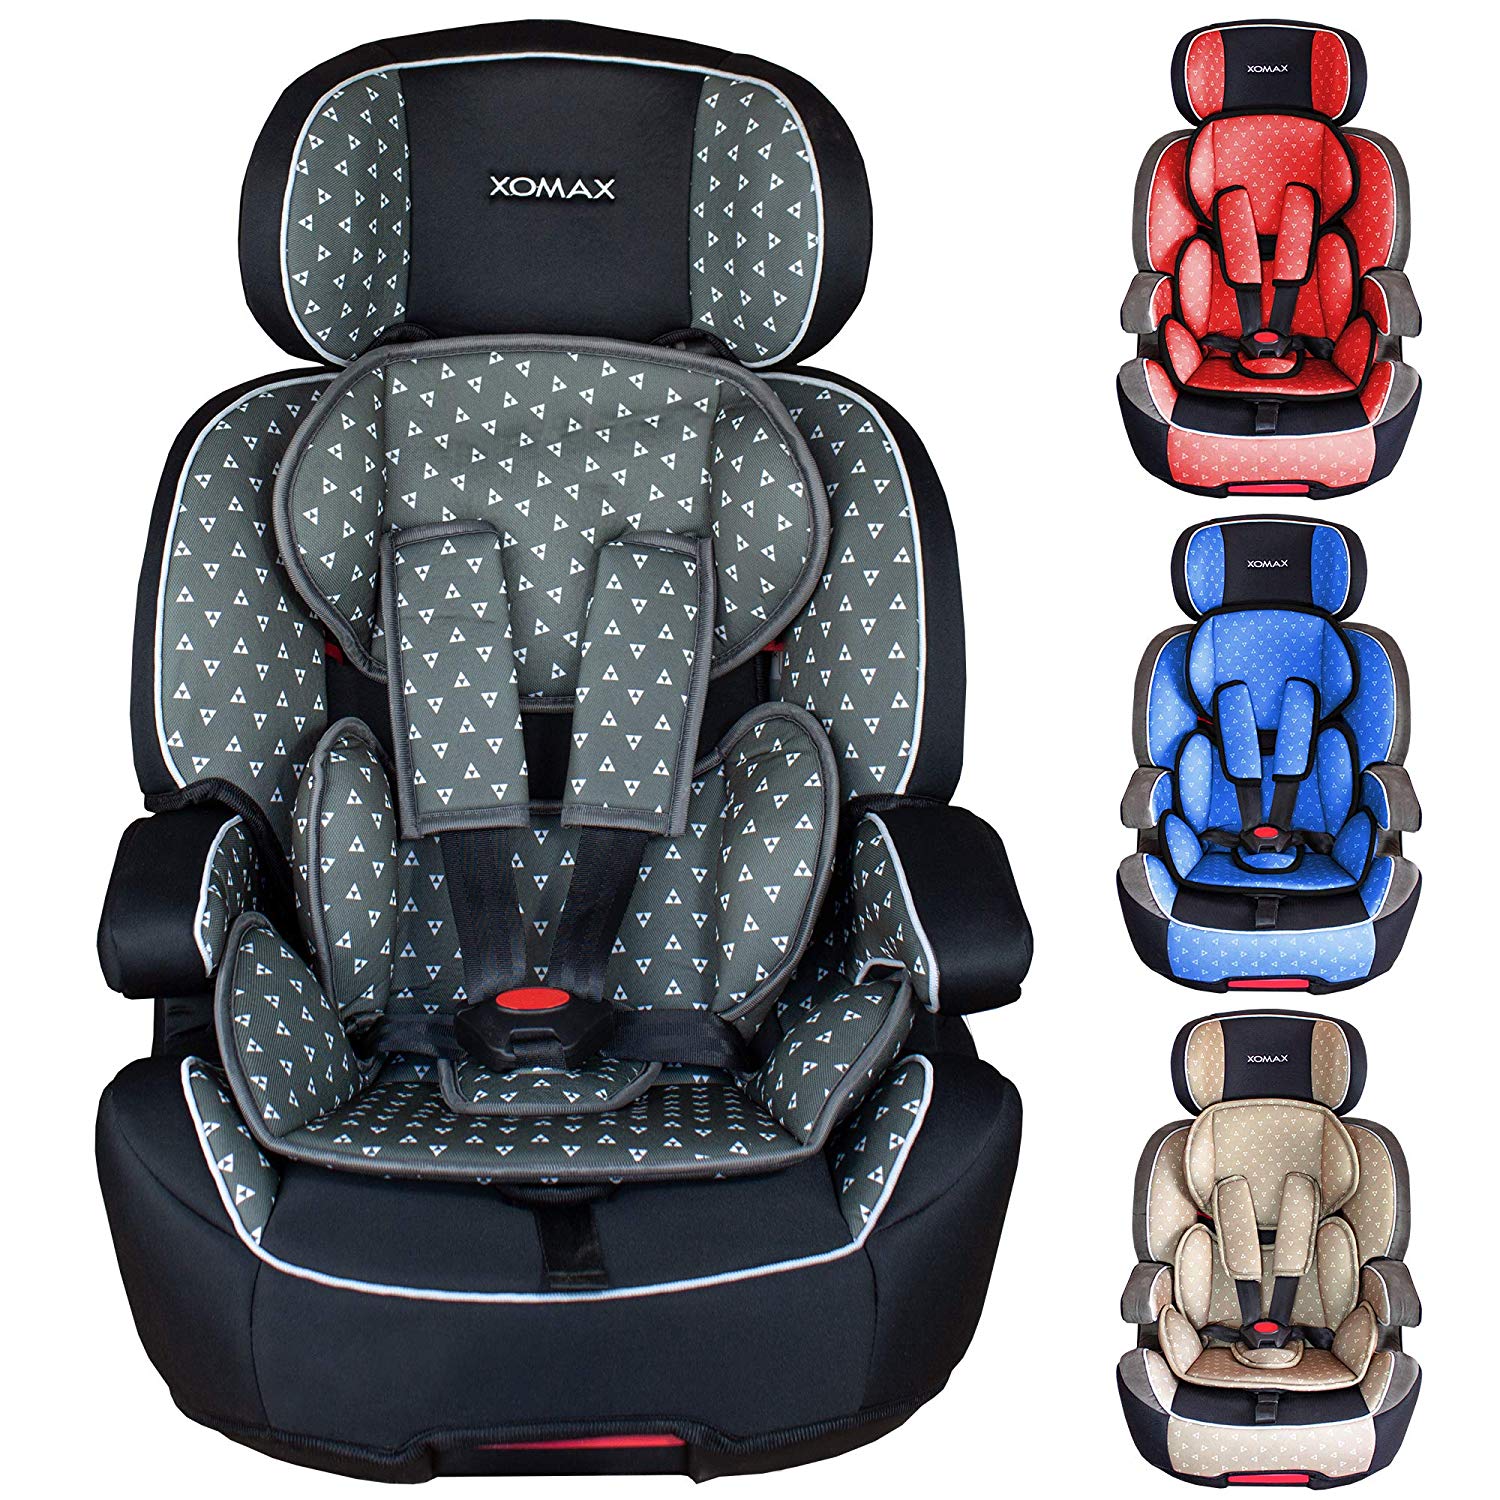 XOMAX XL-518 Child\'s Seat with ISOFIX, Grows with your child, 9-36 kg 1-12 Years Group 1/2/3, 5-Point Harness and 3-Point Harness Removable and Washable Cover ECE R44/04 Grey